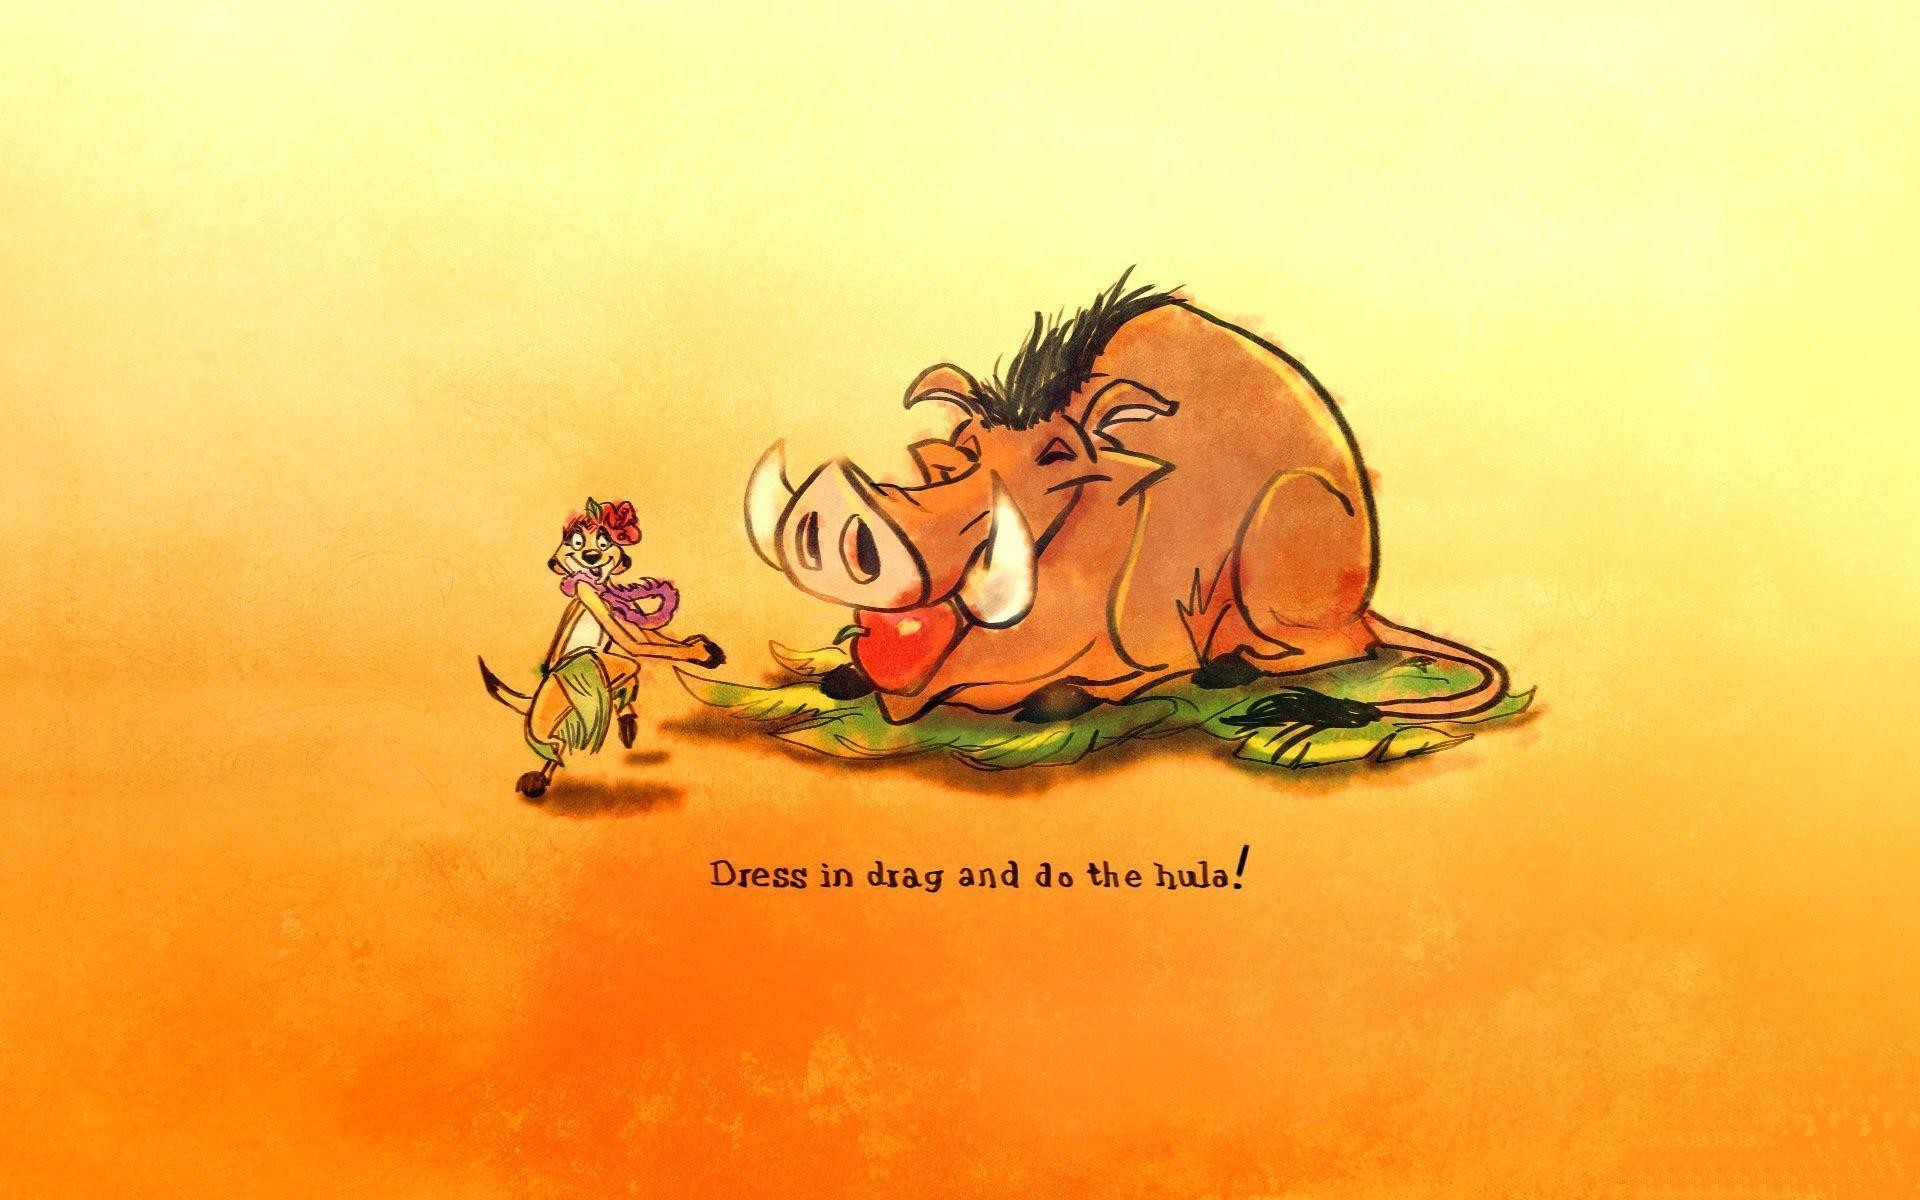 1920x1200 Most Downloaded The Lion King Wallpapers - Full HD wallpaper search